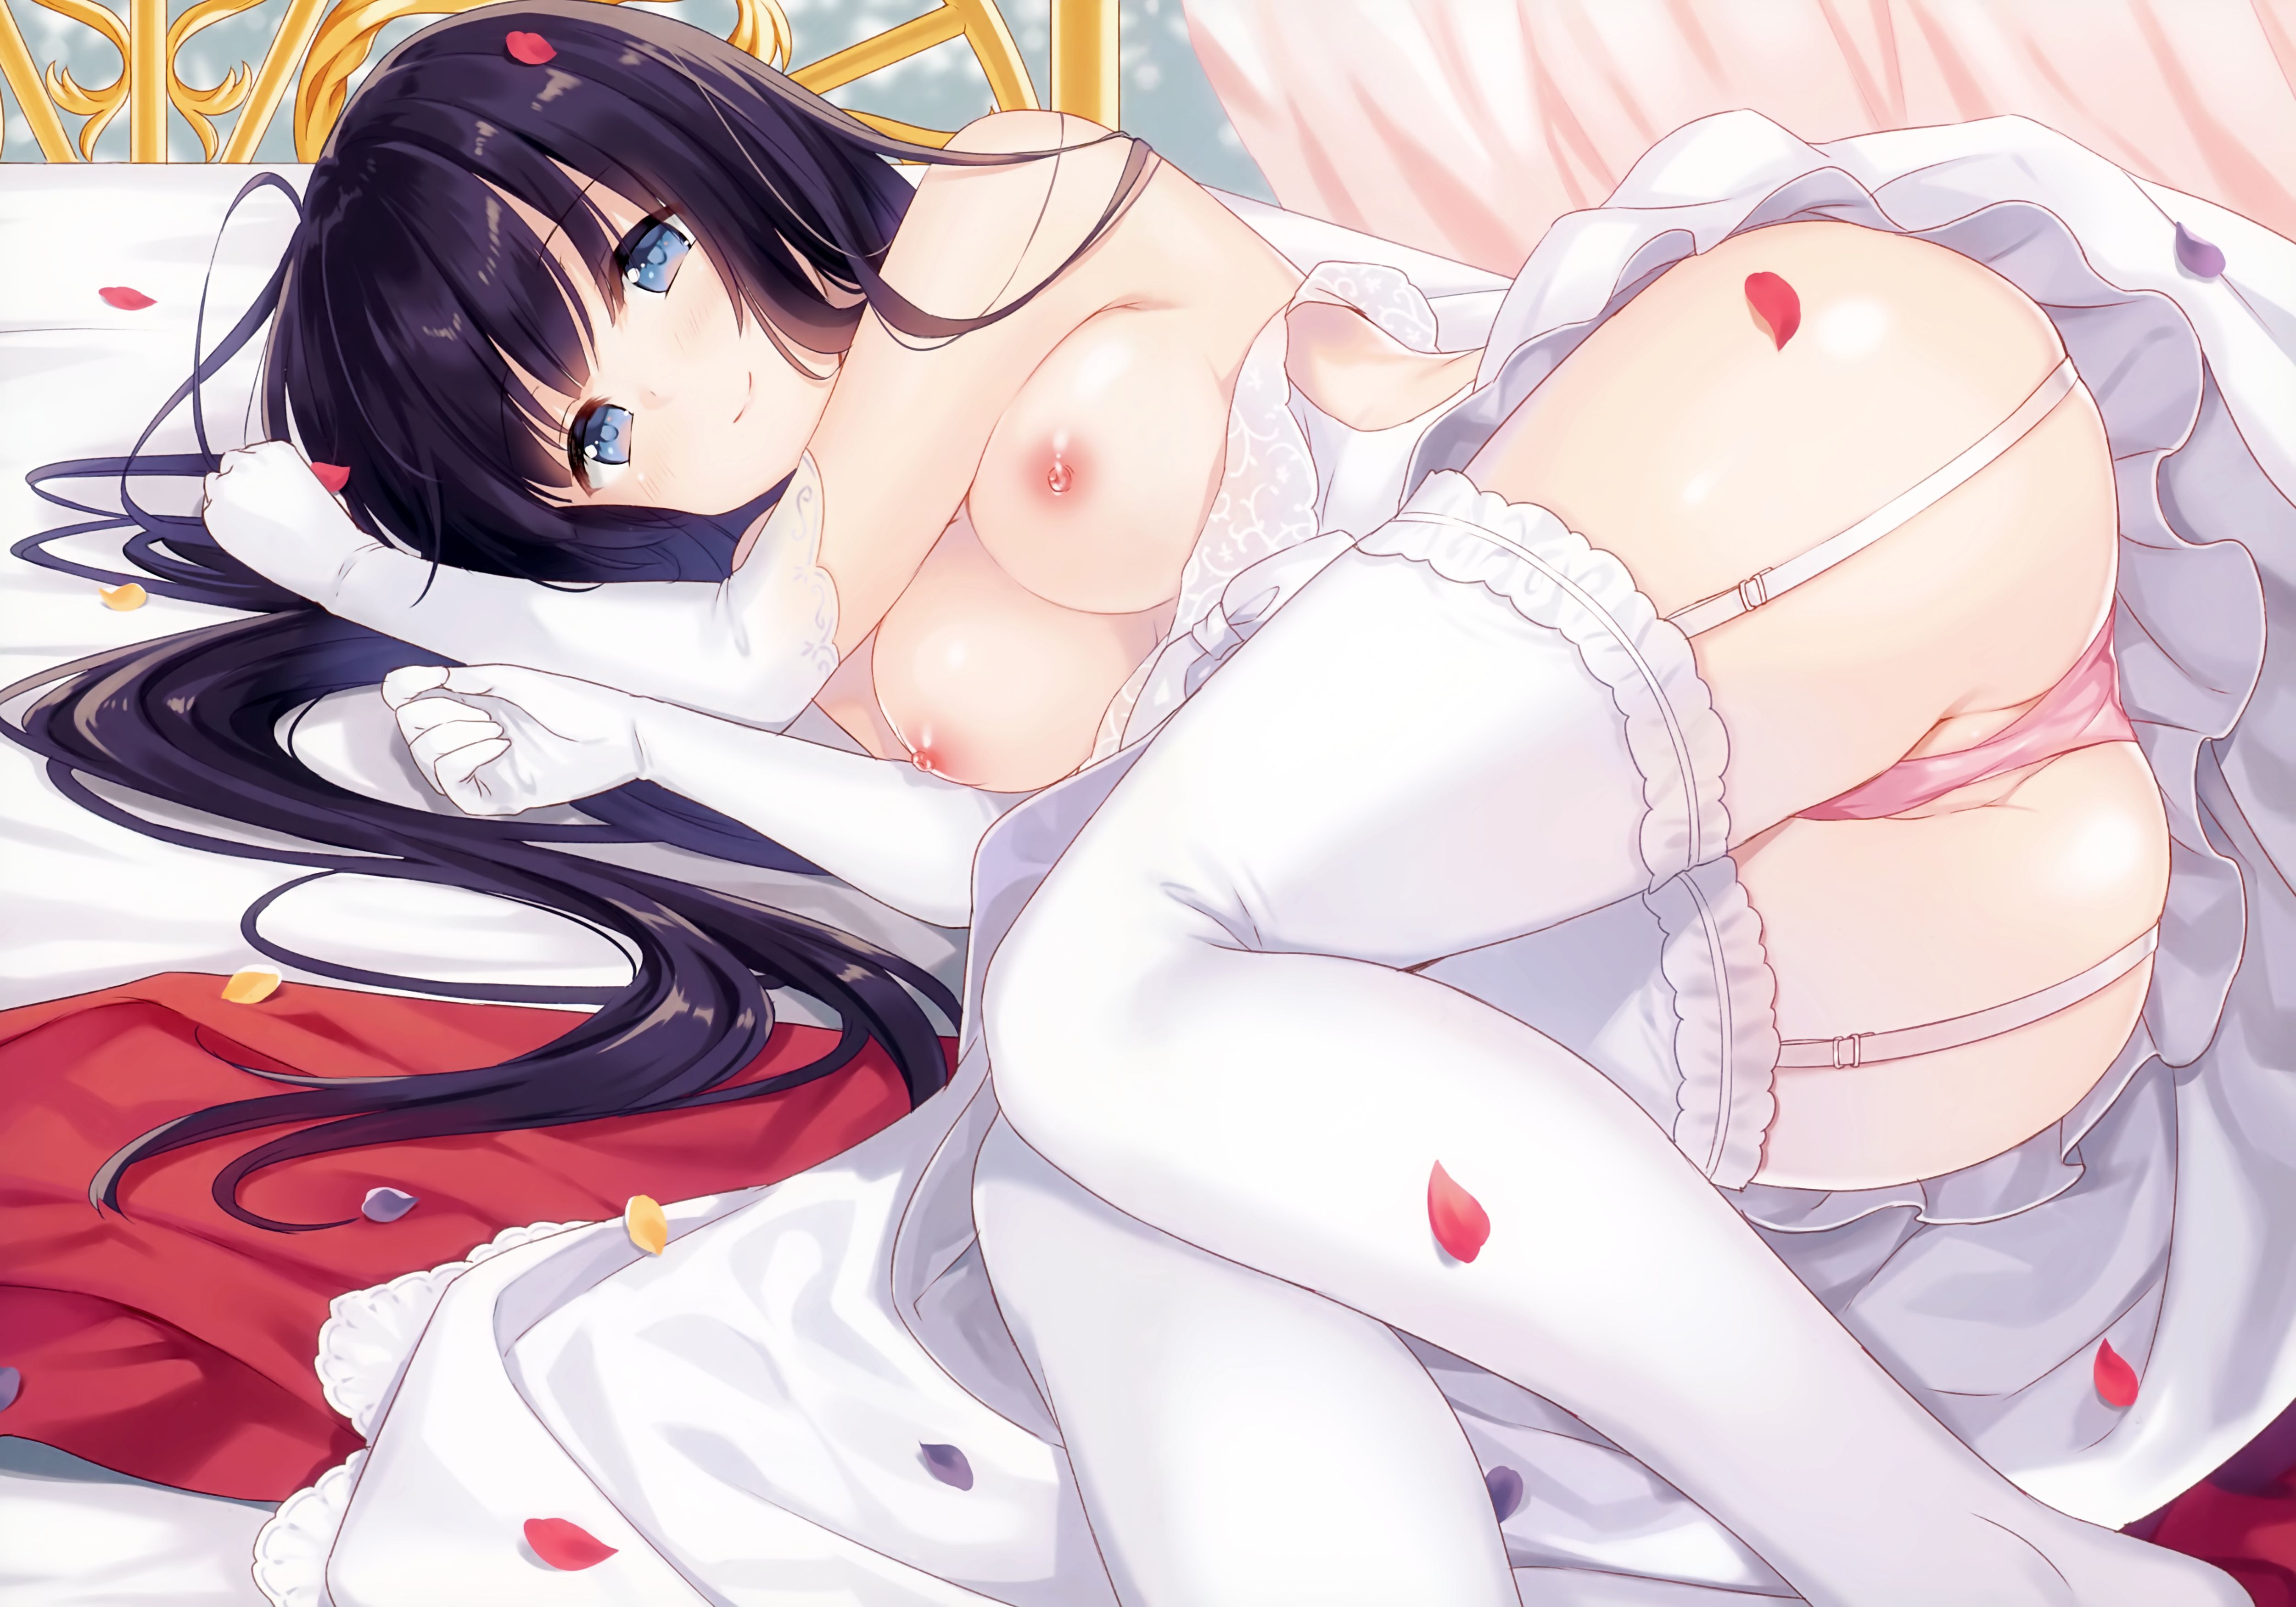 【Erotic Anime Summary】 Erotic images of beautiful girls with beautiful breasts 【50 photos】 21